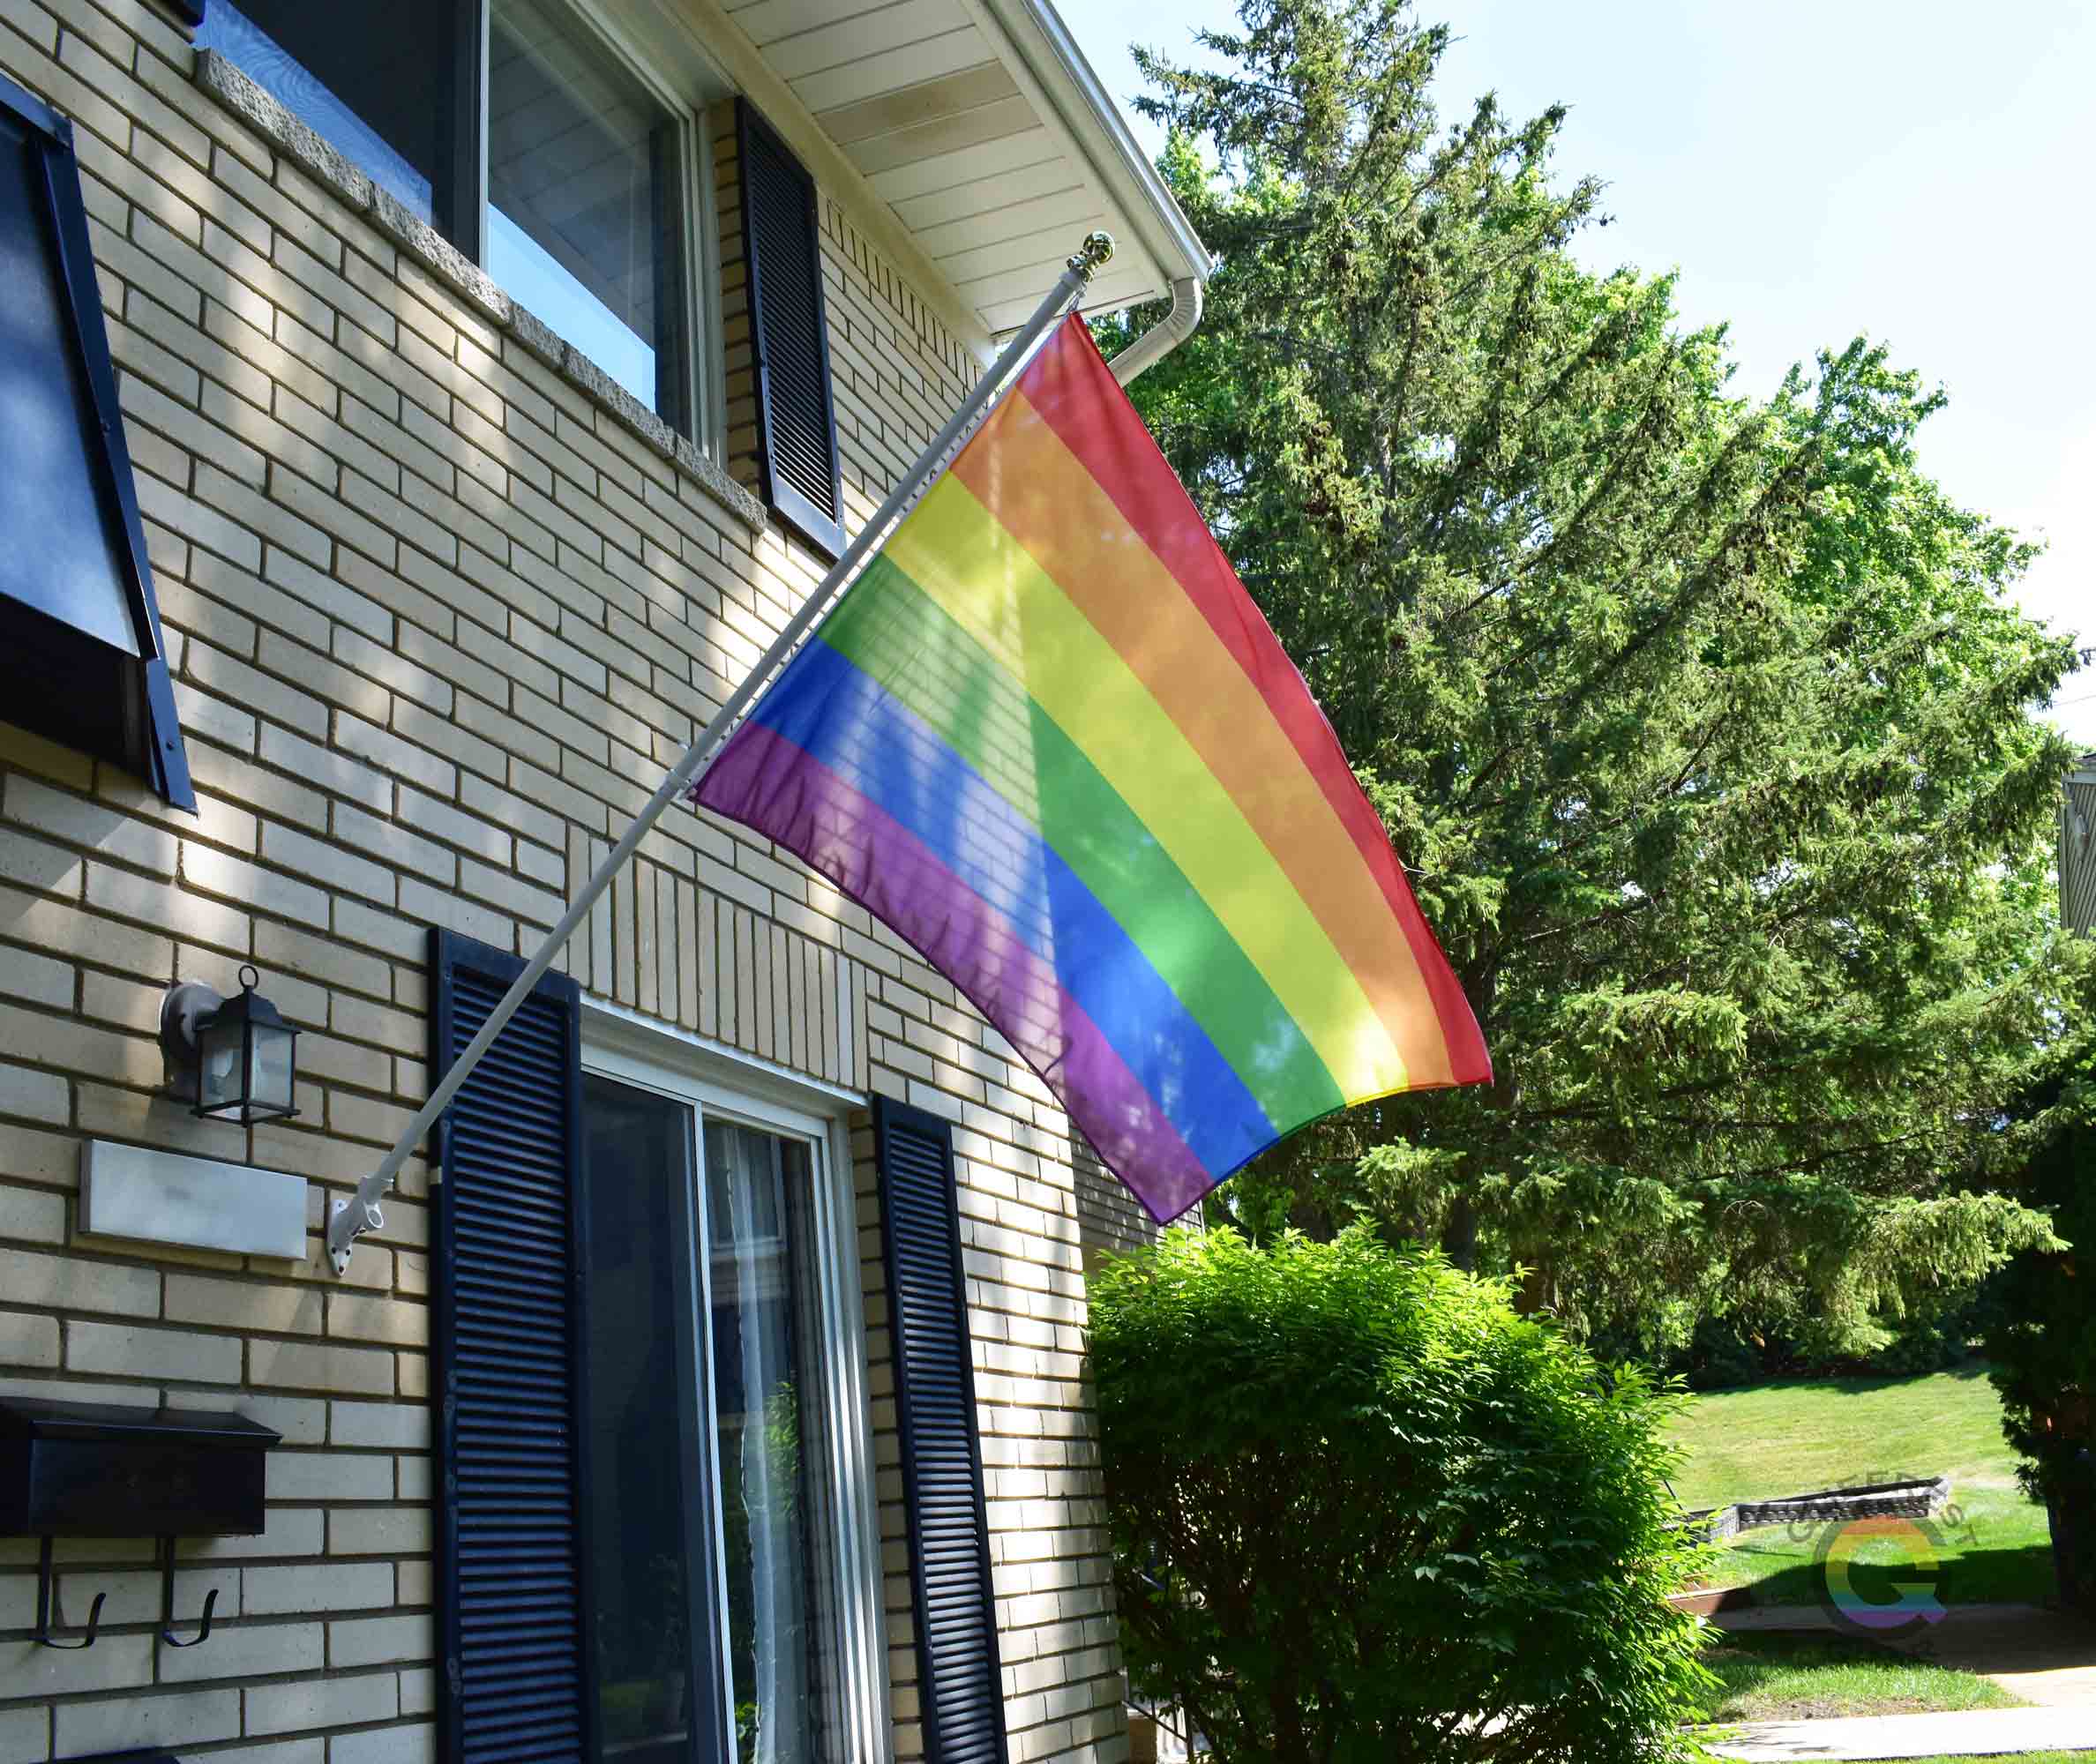 3’x5’ rainbow pride flag hanging from a flagpole on the outside of a light brick house with dark shutters